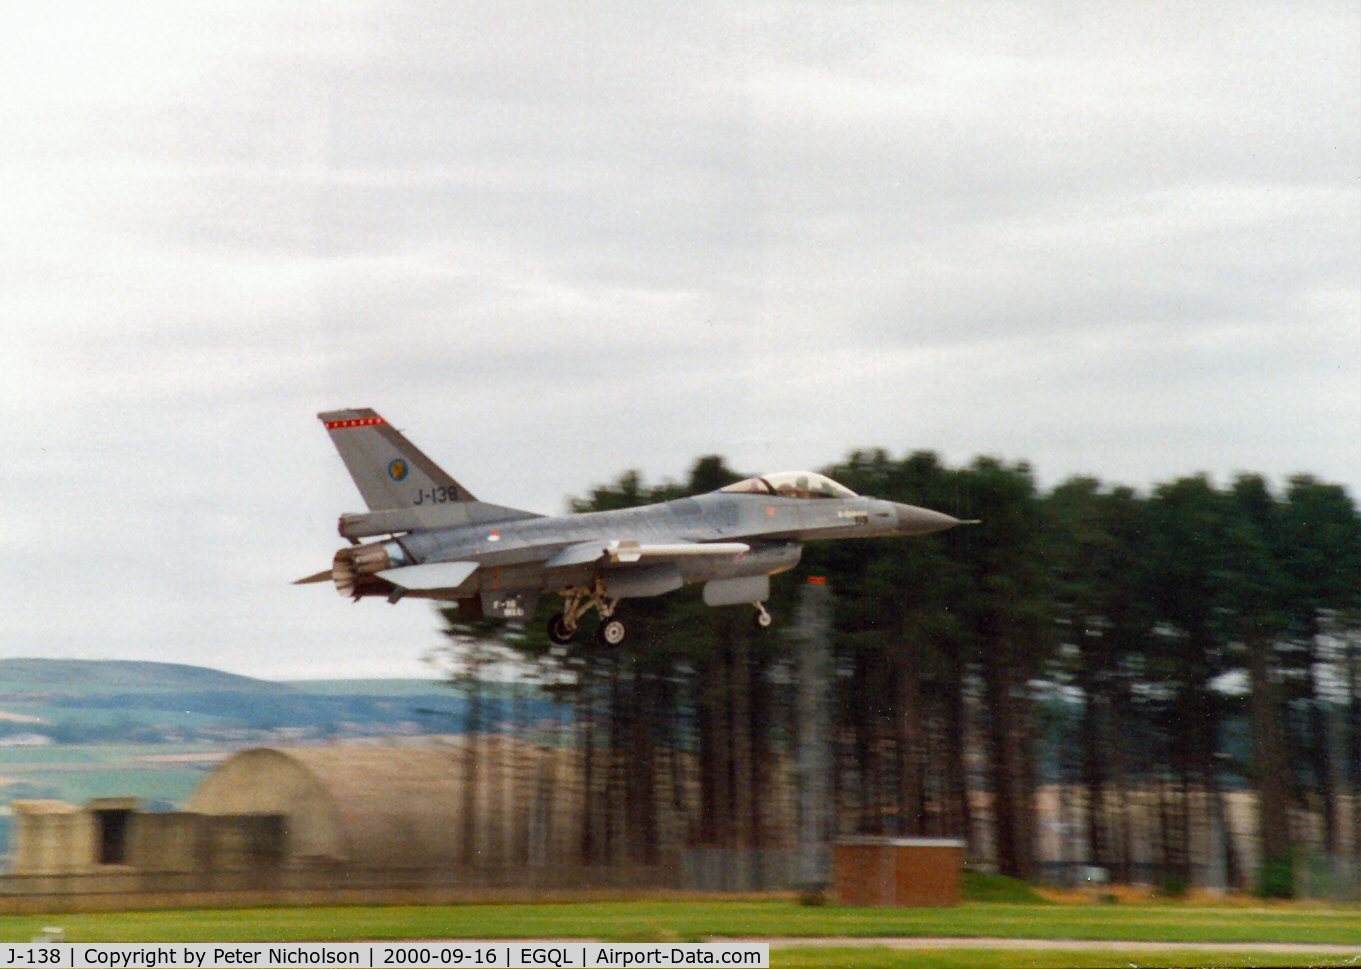 J-138, Fokker F-16AM Fighting Falcon C/N 6D-128, F-16AM, callsign Orange 1, of 315 Squadron Royal Netherlands Air Force landing at the 2000 Leuchars Airshow.